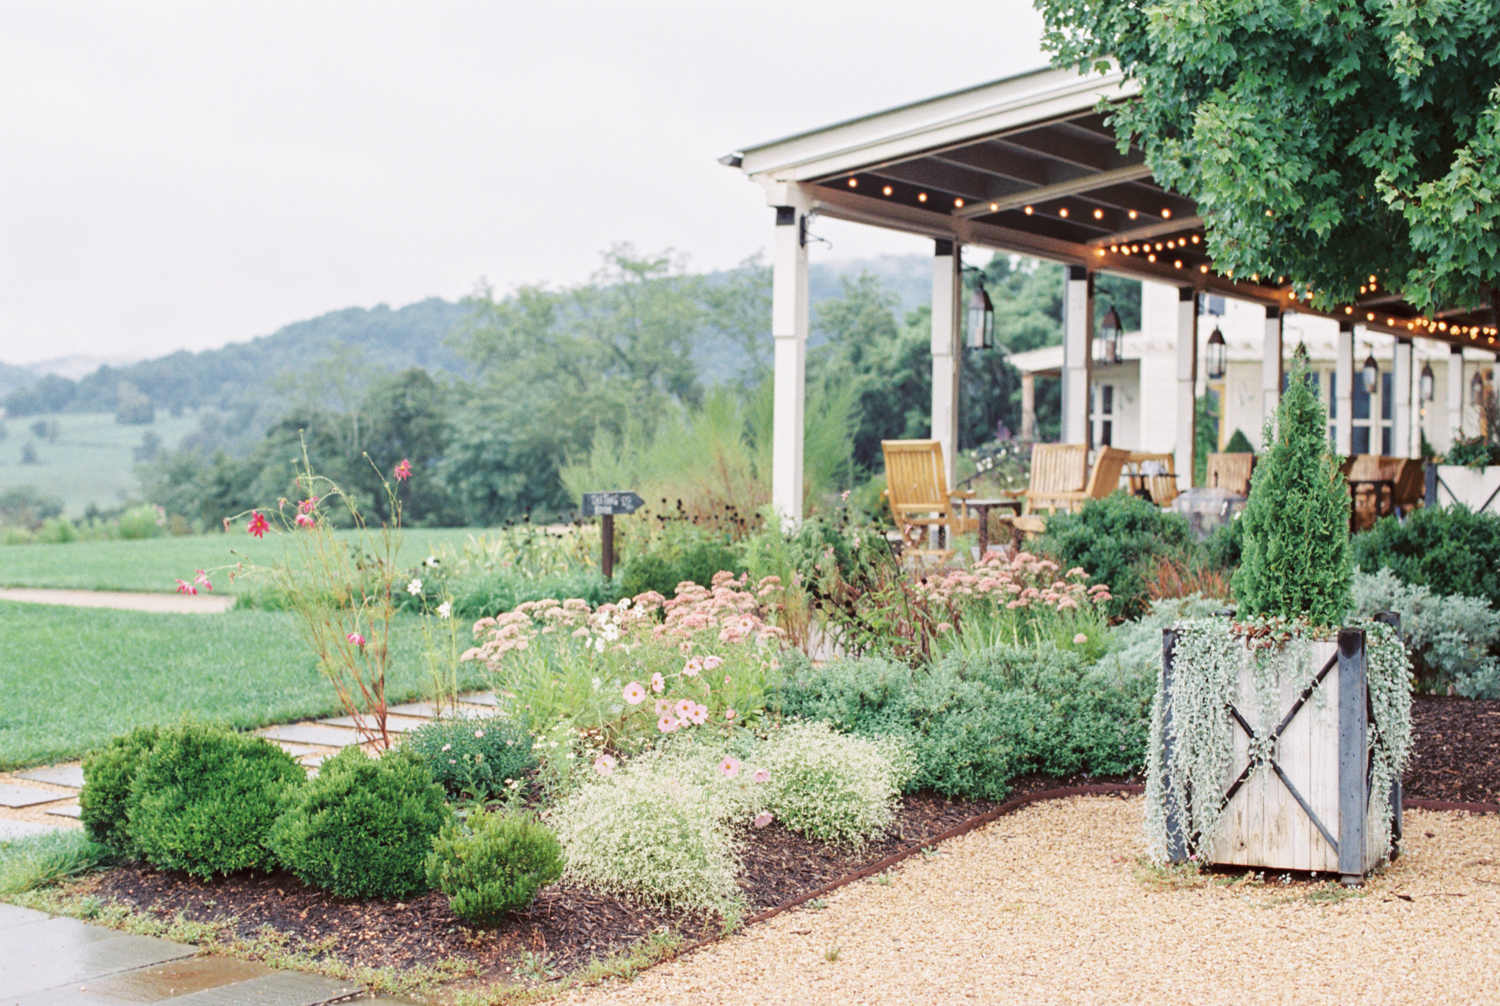 Pippin Hill Wedding Photos | Molly Carr Photography | Lauren Emerson Events | Pippin Hill Farm & Vineyard | Morning in Charlottesville 